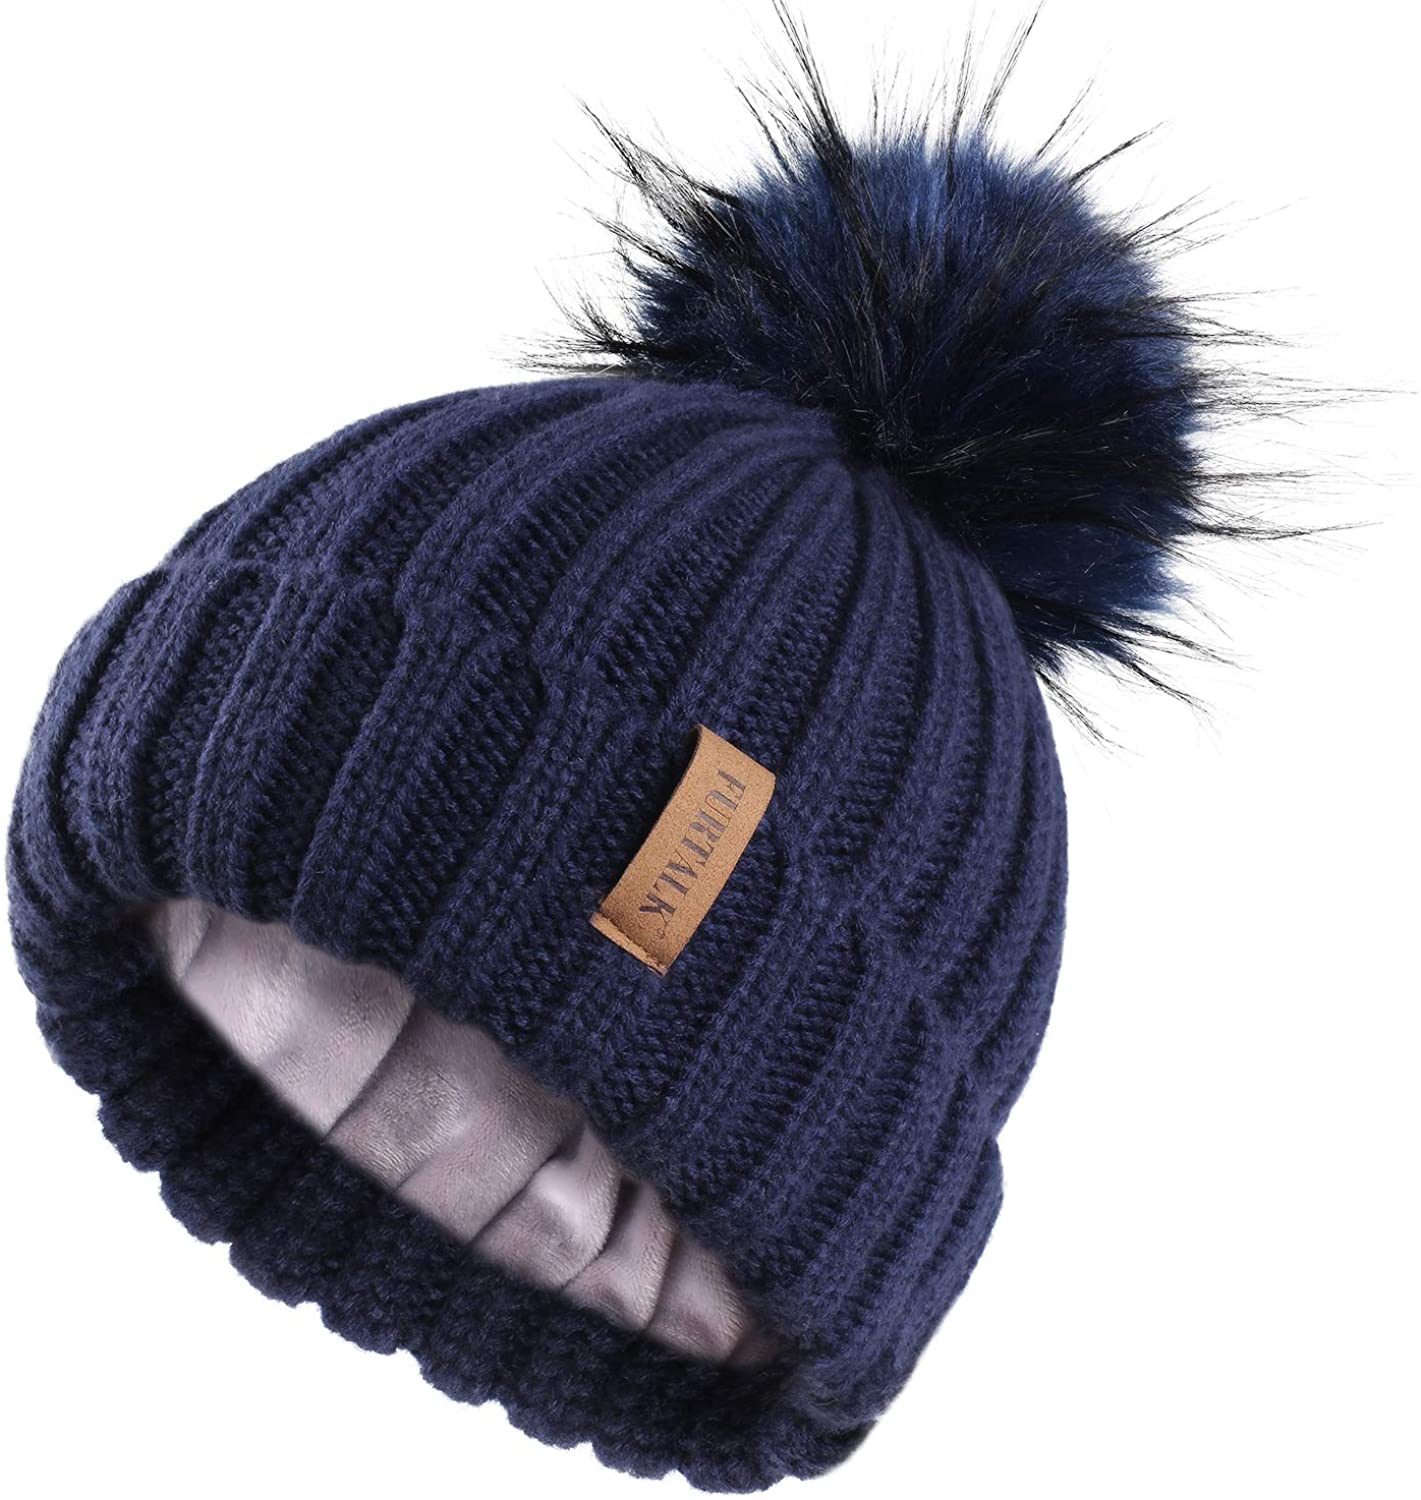 Ekkia Sparkle Thread Knitted Soft Lined Warm Winter Bobble Hat FREE P&P 